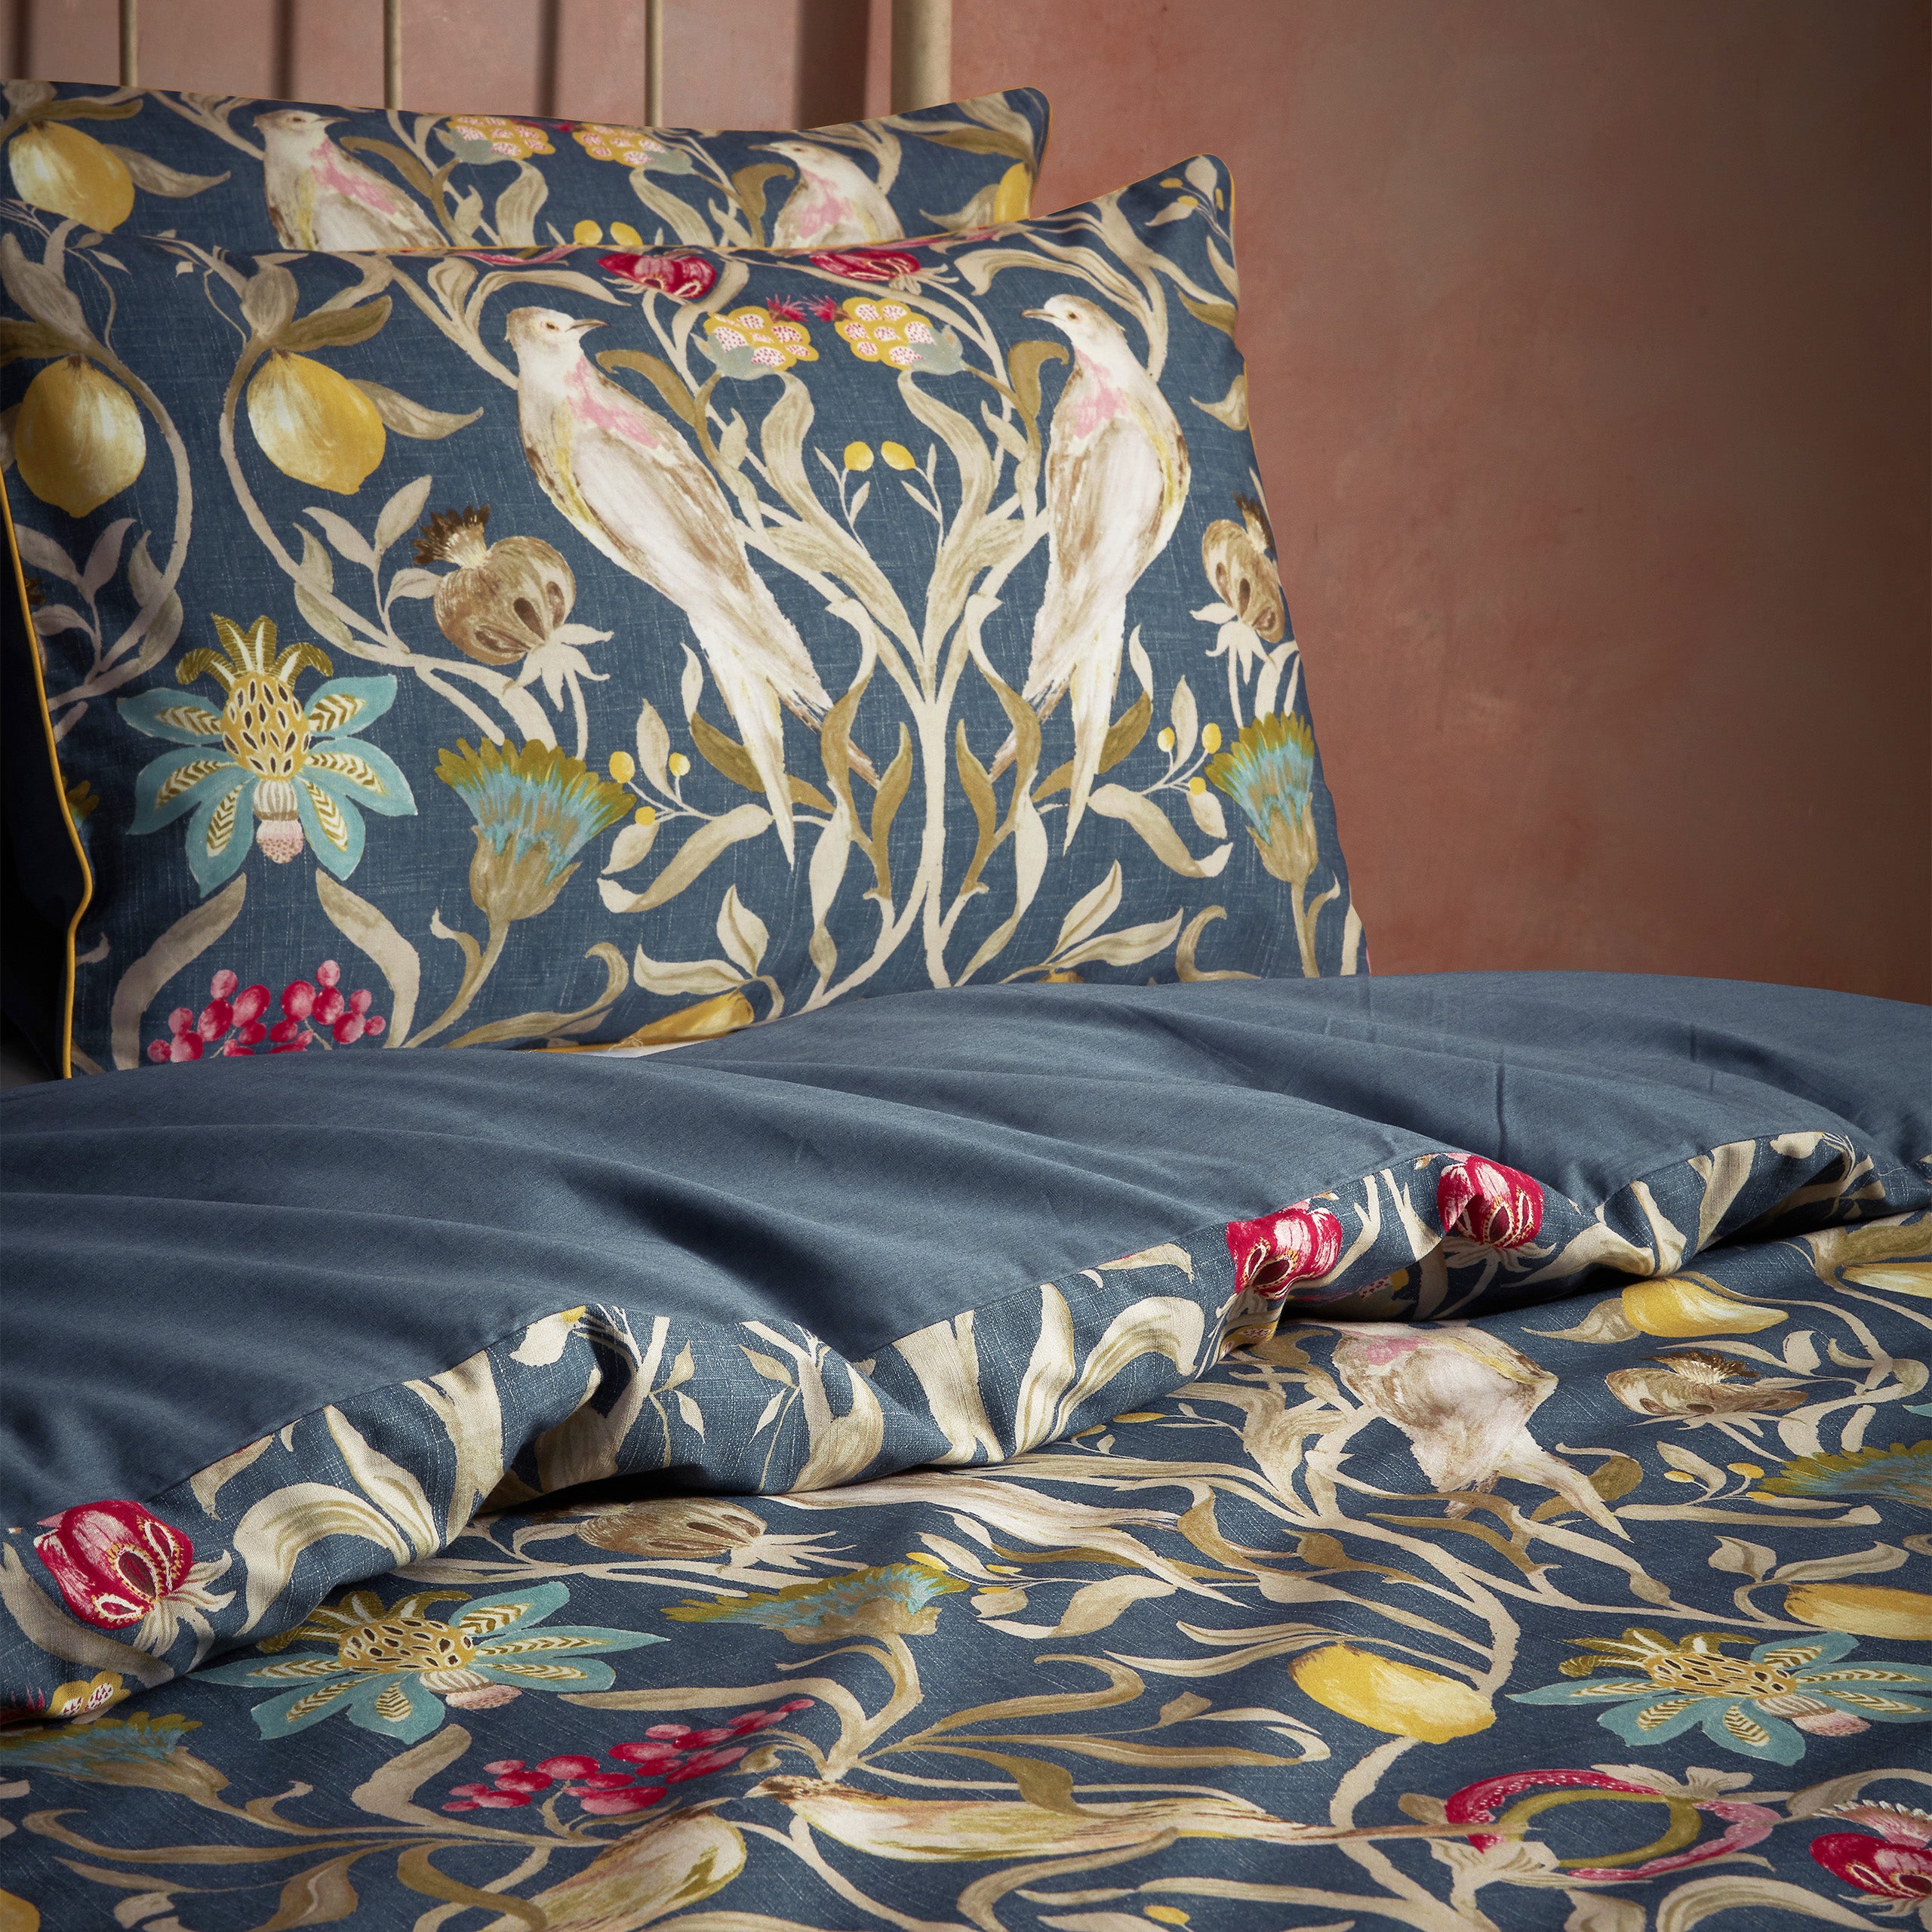 Lavish Floral Printed Piped Cotton Sateen King Duvet Cover Set